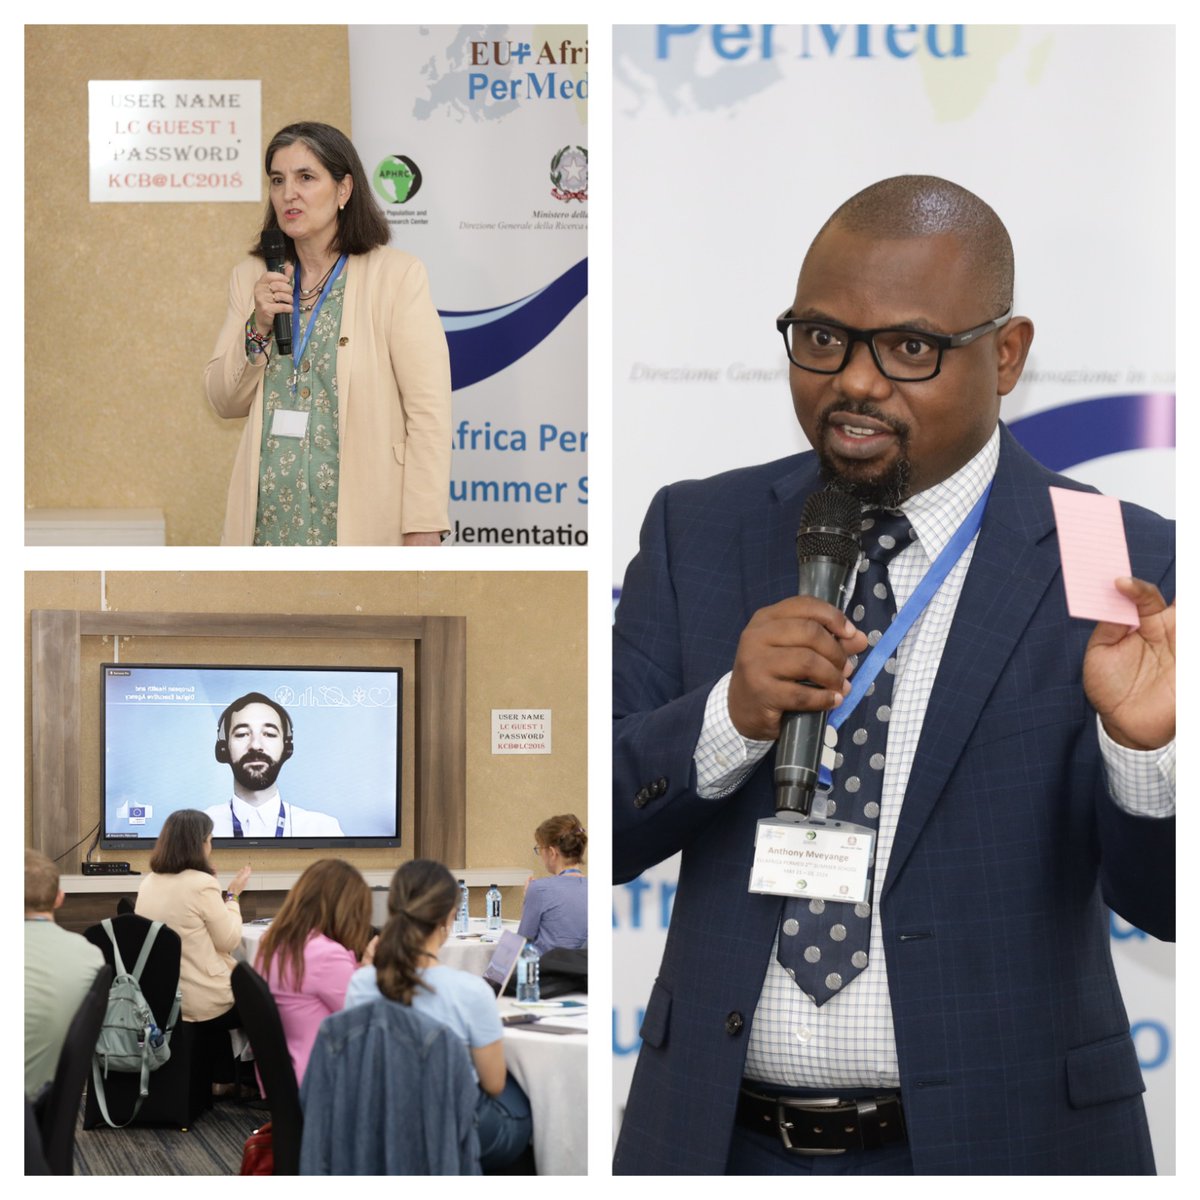 @EU_AfricaPerMed's second summer school kicks off! The workshop began earlier today with opening remarks from @Amveyange @alexpadurean and @ErikaSelaq. The topics are anchored on the implementation of personalized medicine.

#PersonalisedMedicine #WeAreAfrica #IamAPHRC